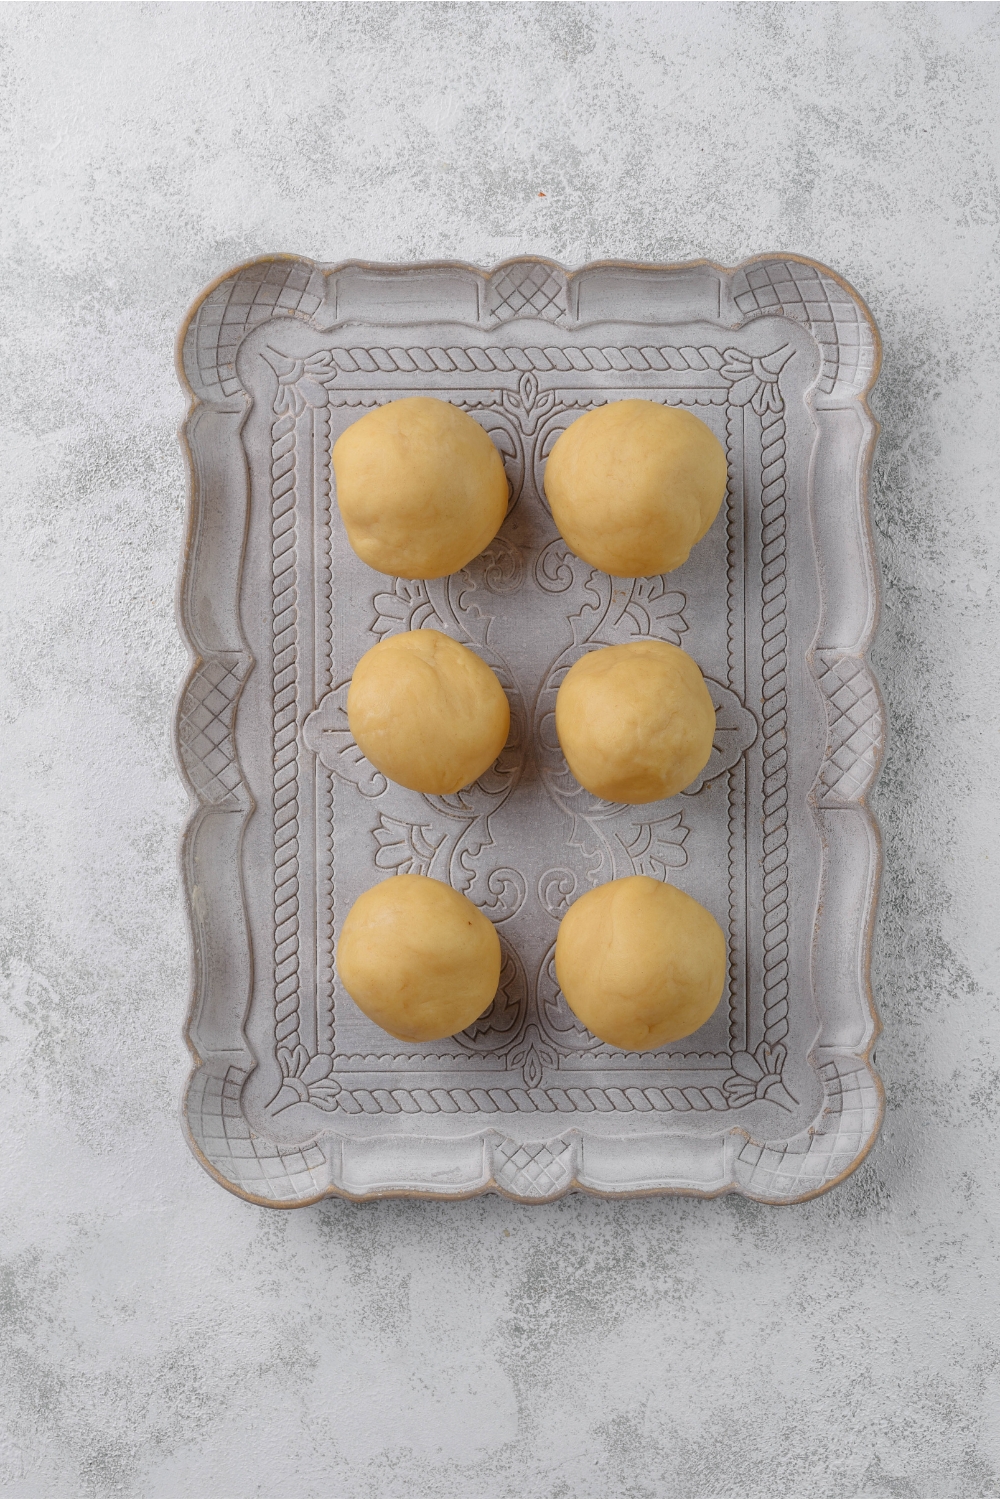 A platter with six evenly-sized dough balls.